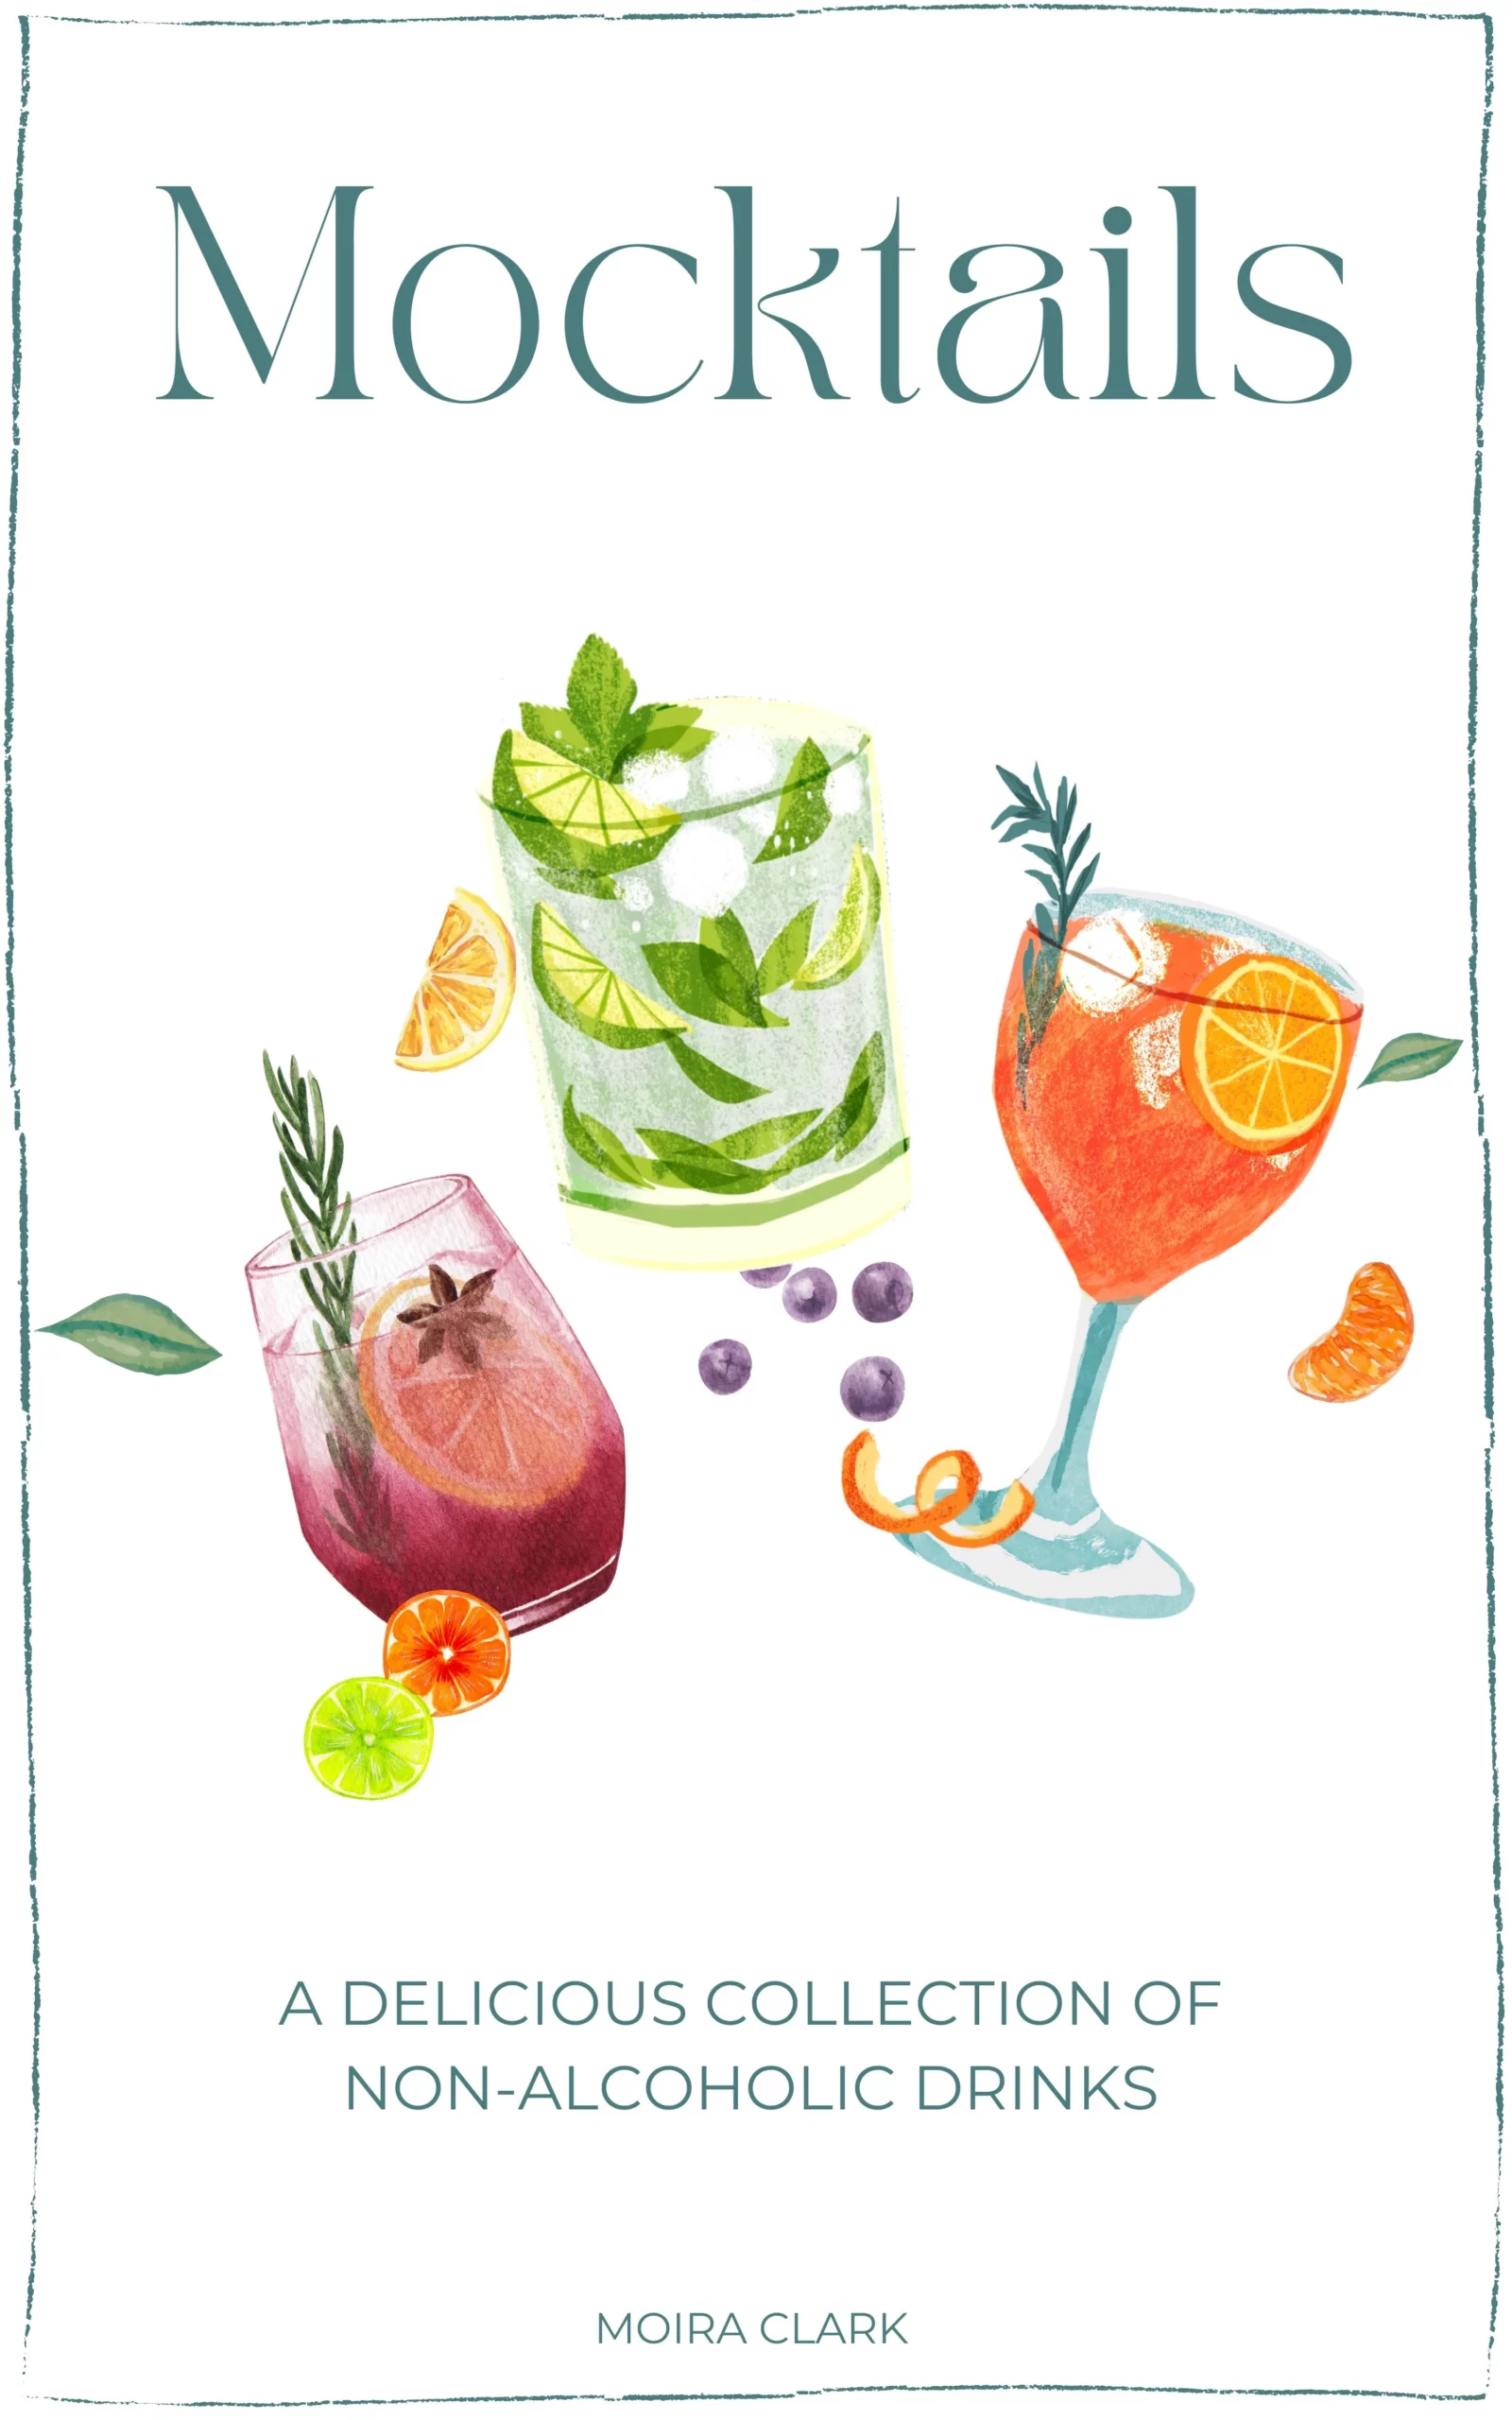 Mocktails: A Delicious Collection of Non-Alcoholic Drinks